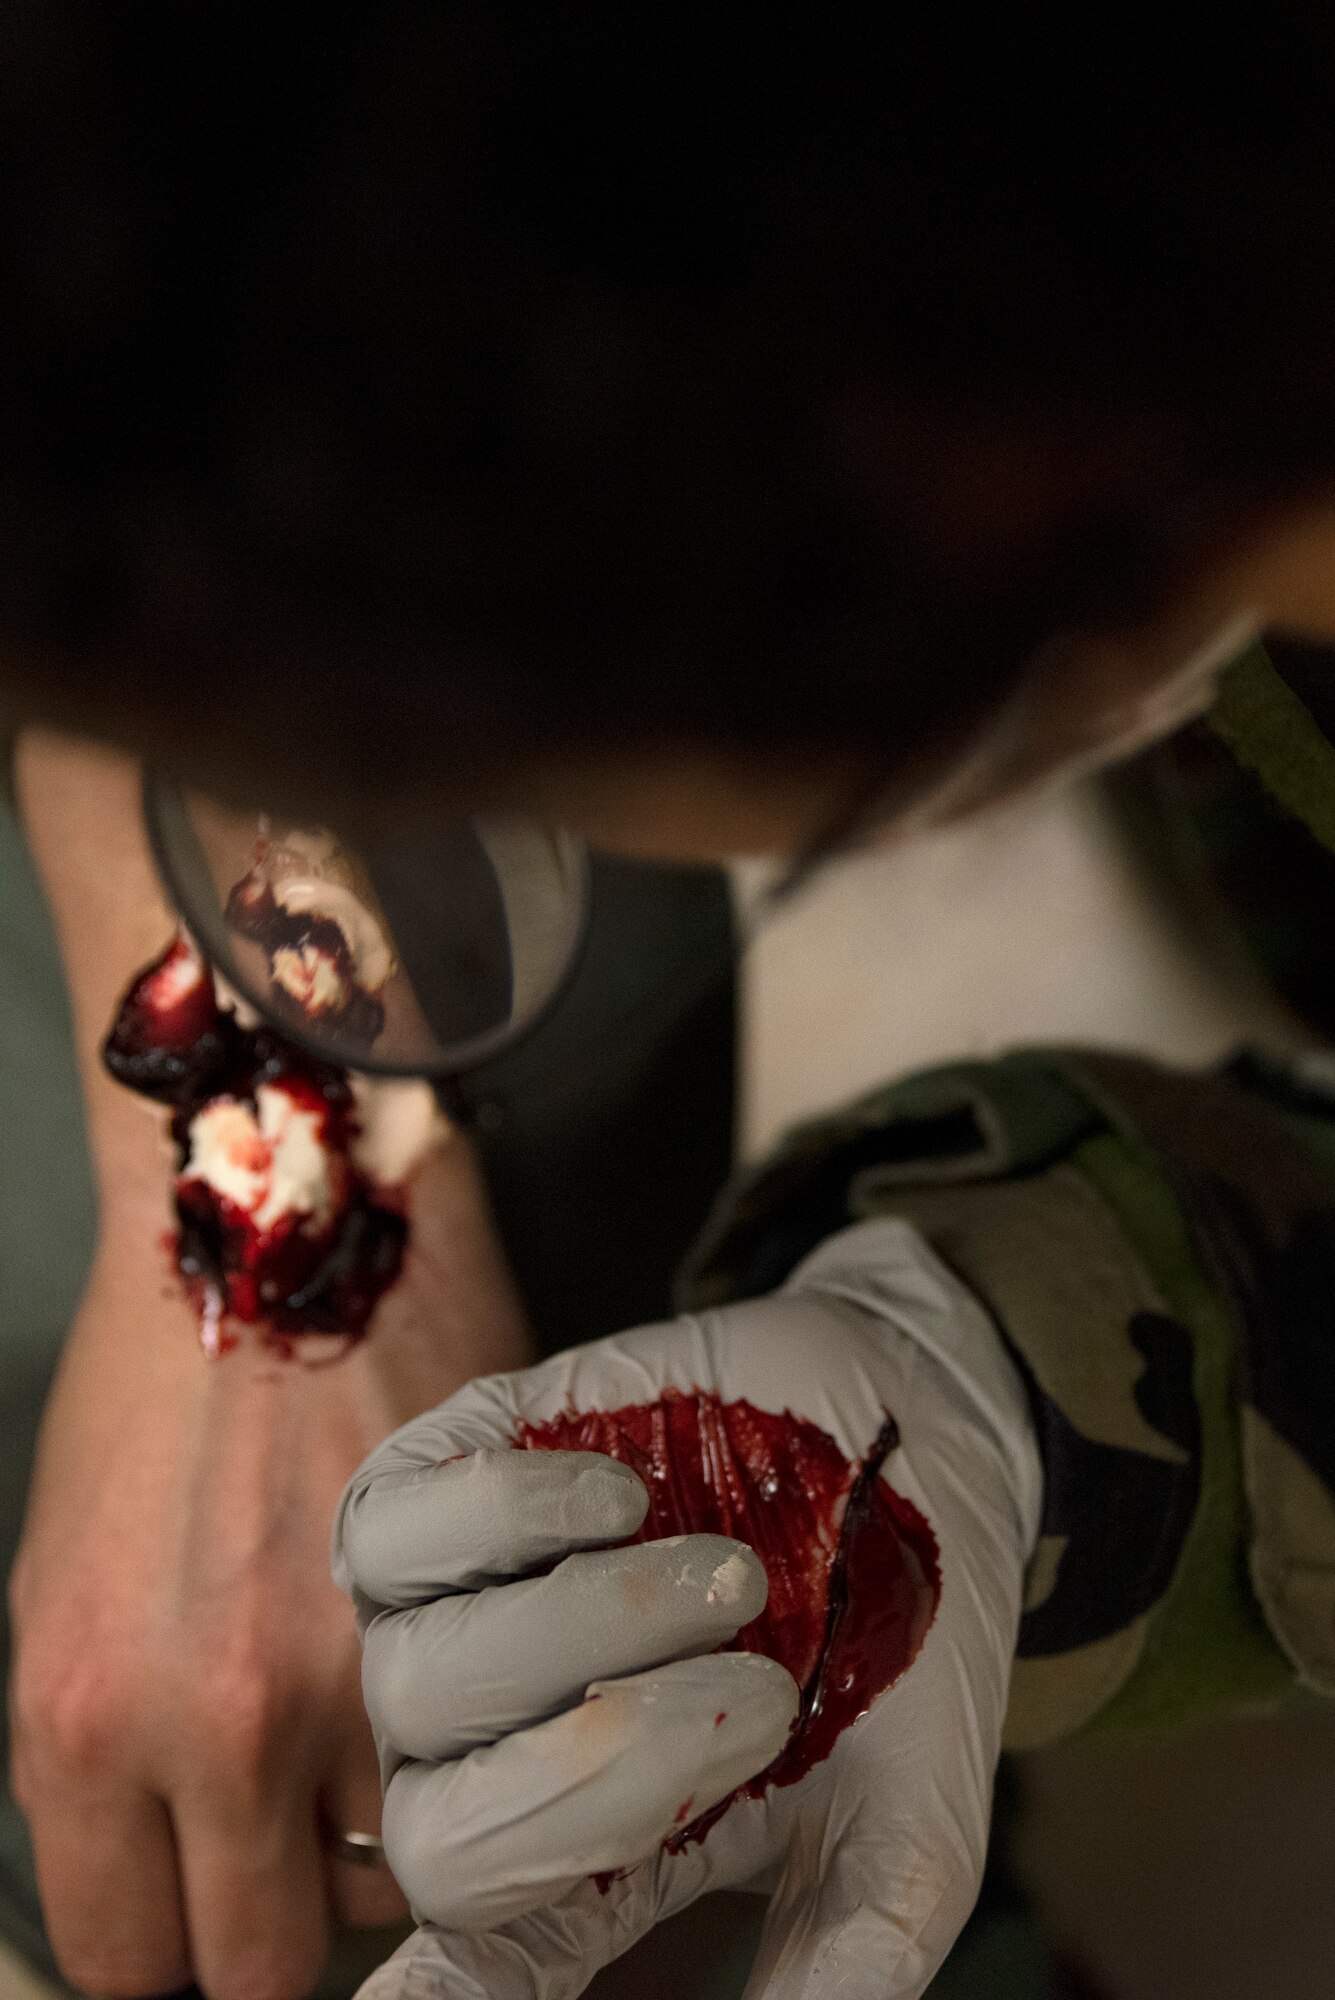 Senior Airman Kenyetta Oglesbe adds fake blood to a broken wrist fracture moulage prior to a training scenario